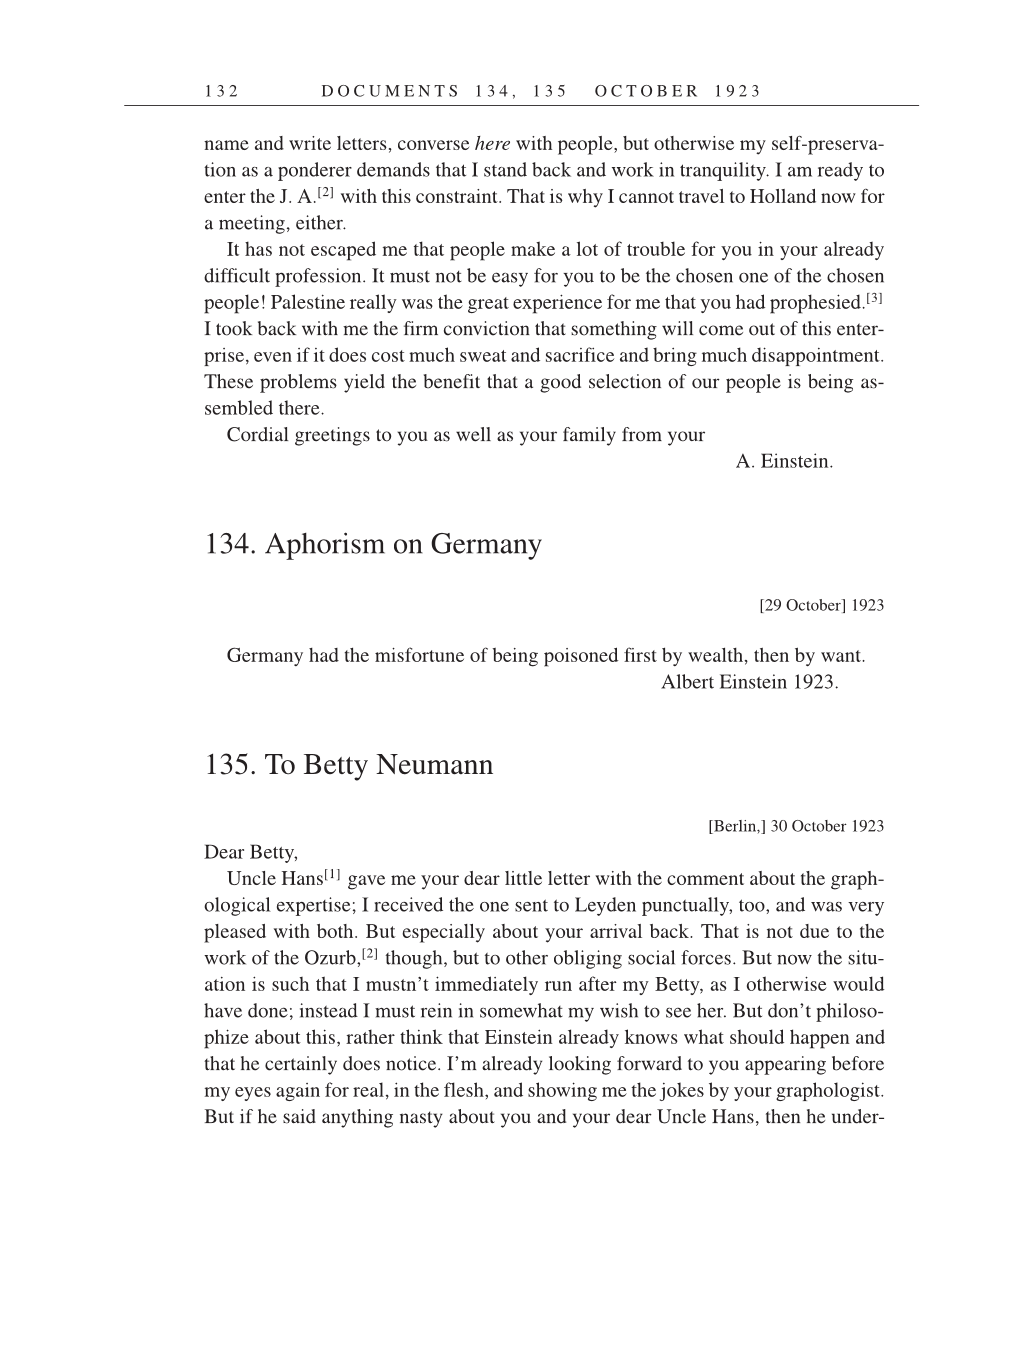 Volume 14: The Berlin Years: Writings & Correspondence, April 1923-May 1925 (English Translation Supplement) page 132